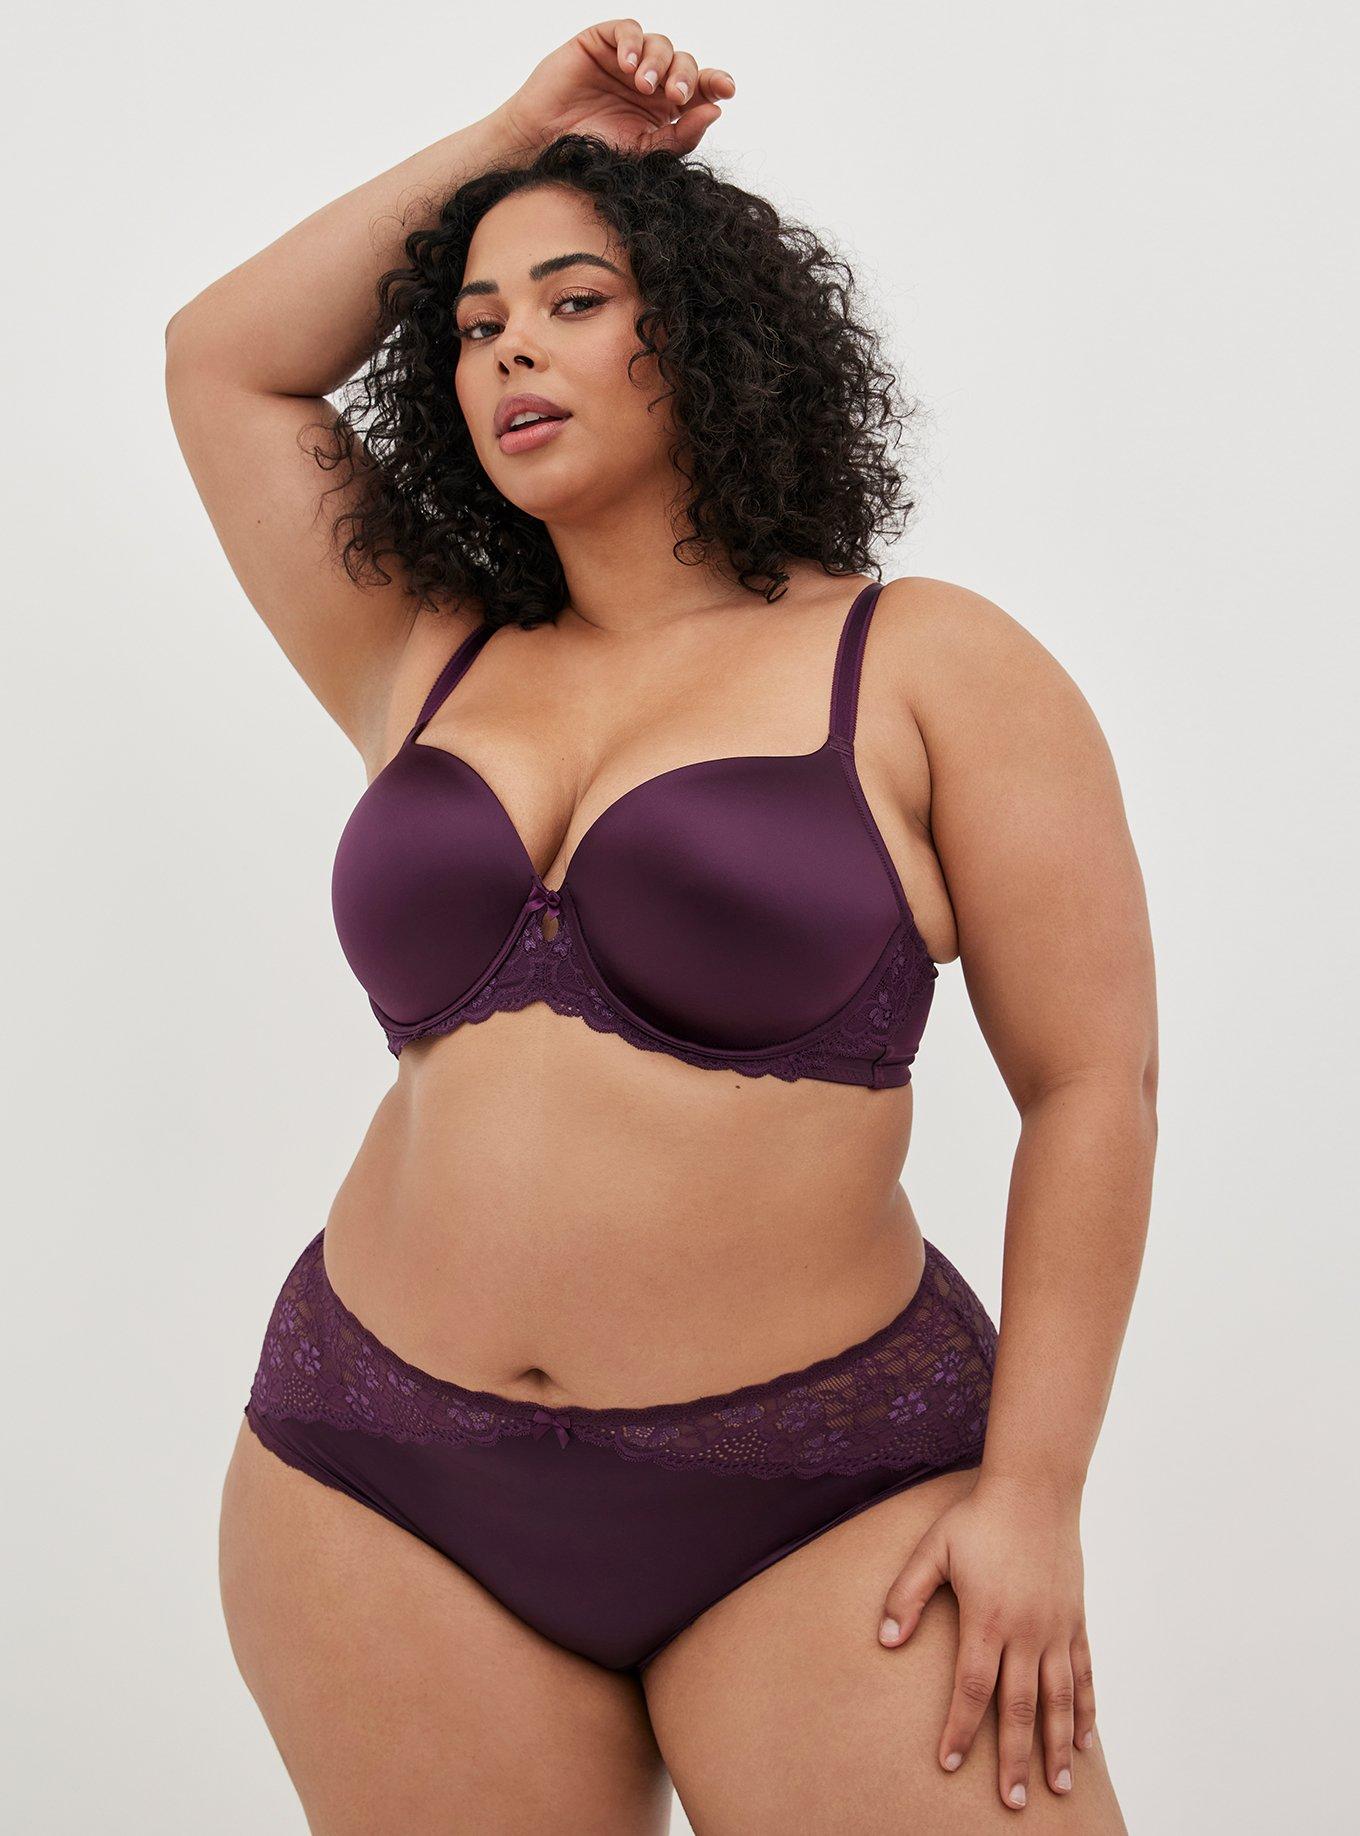 TOP 10 BEST Plus Size Lingerie in New Orleans, Louisiana - March